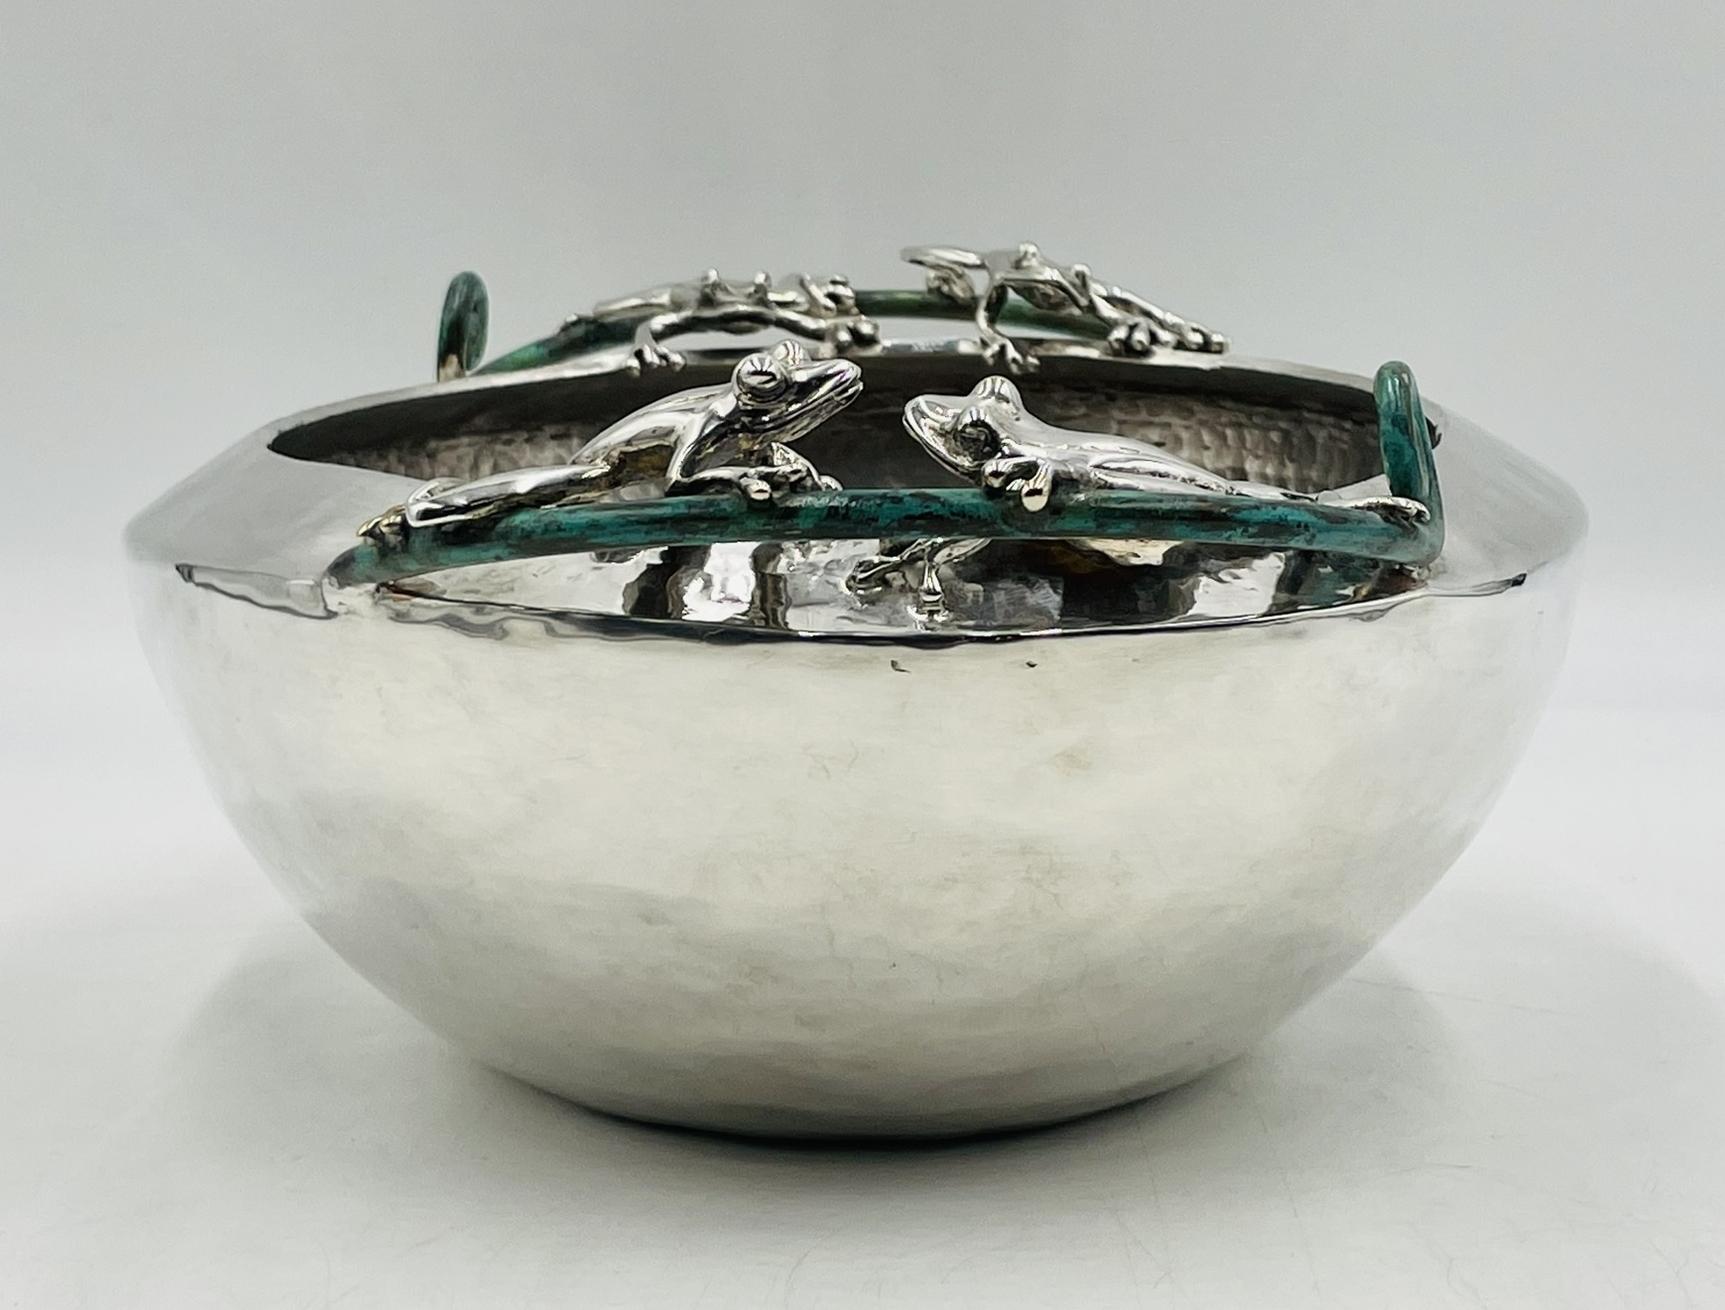 Modern Large Silver-Plated Bowl With Frogs Handles by Emilia Castillo, Mexico 21st Cent For Sale